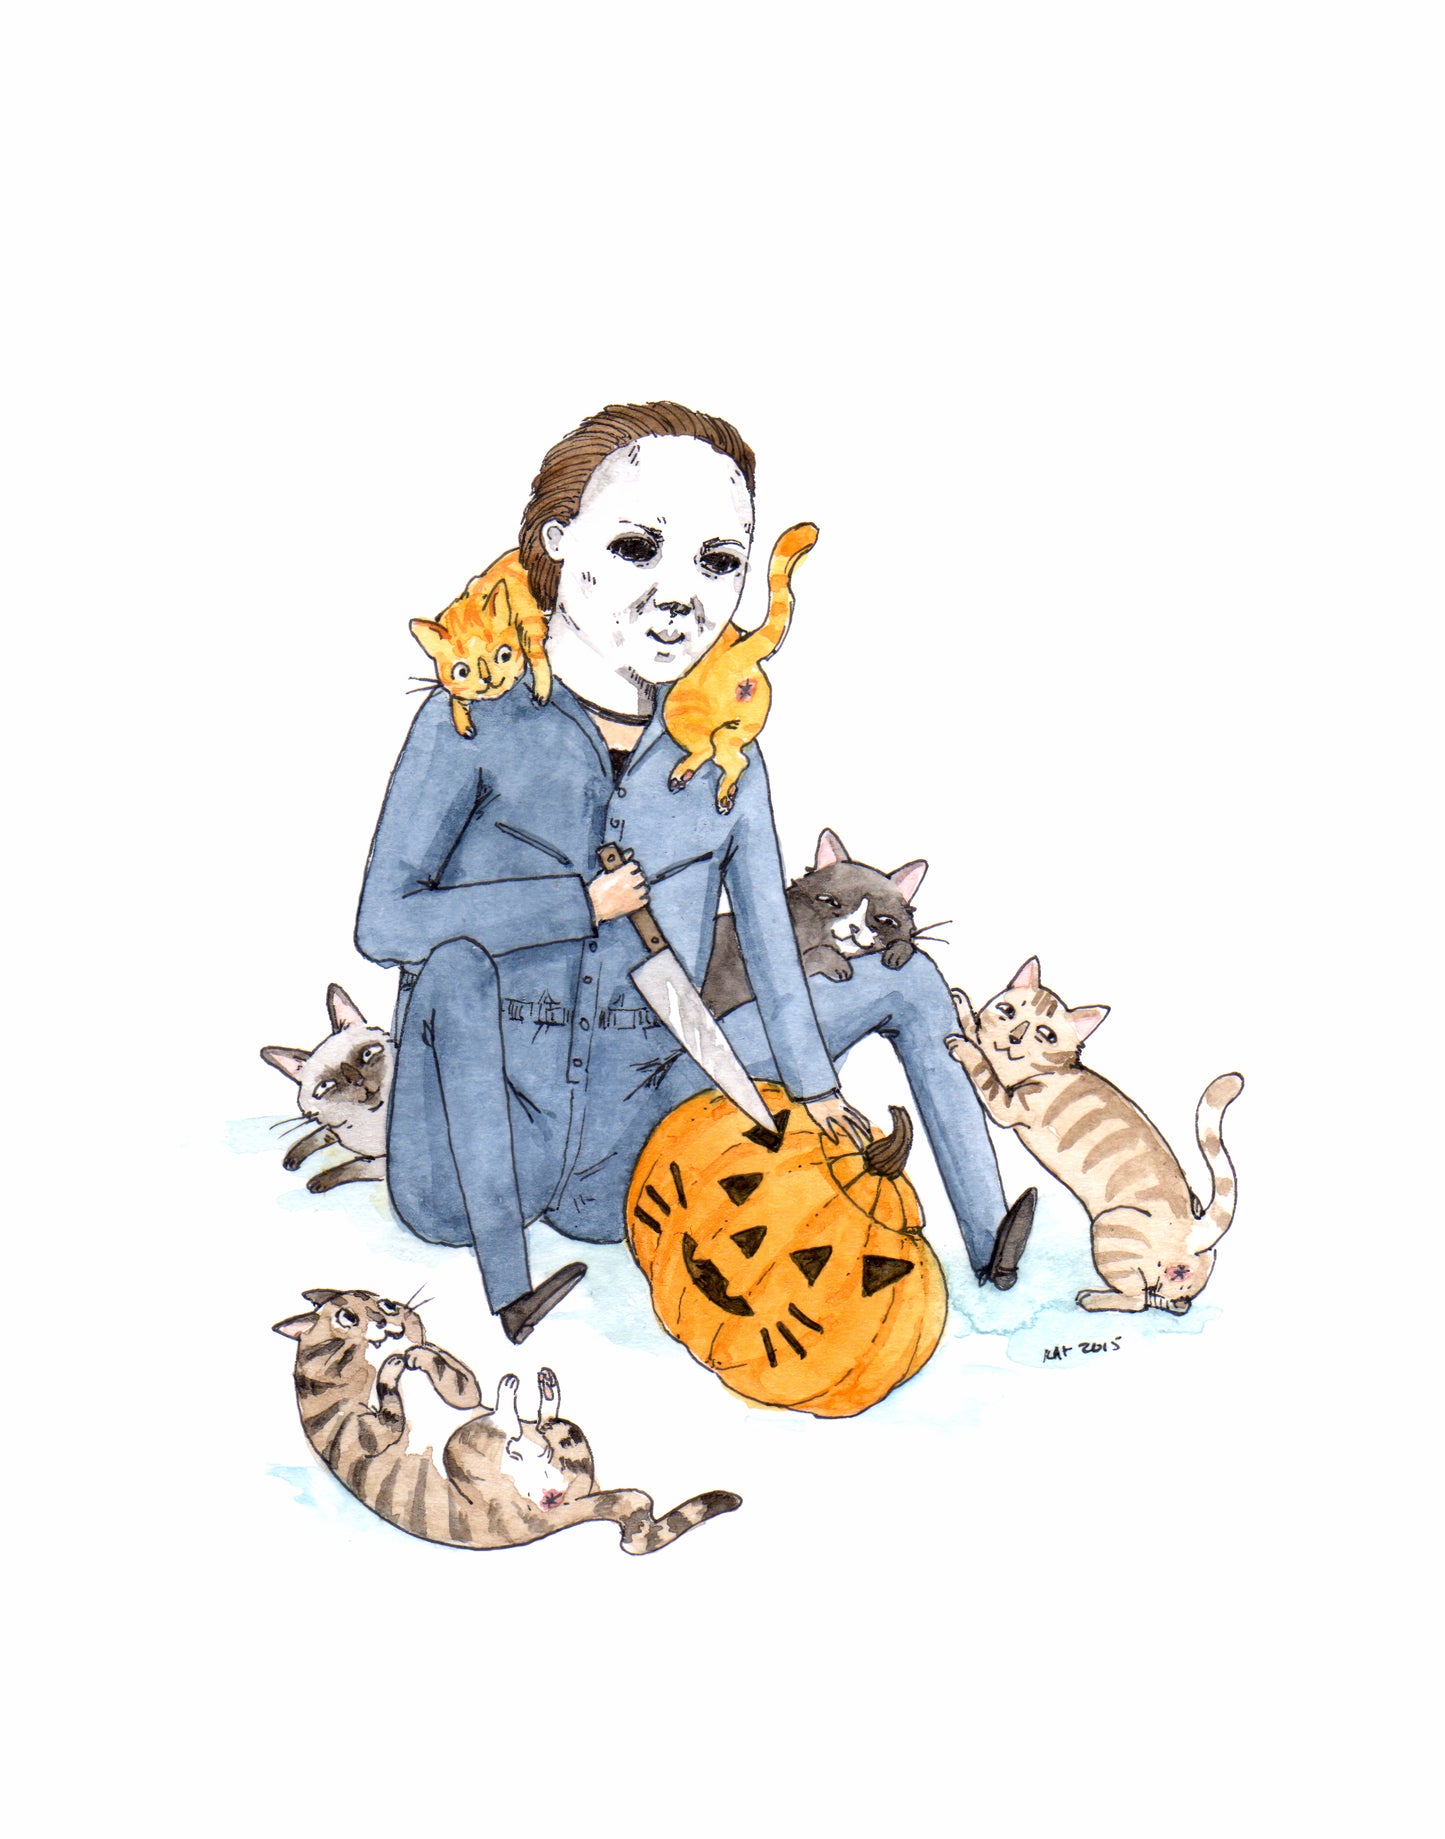 Meowlloween - Halloween with Cats Print- Available in 5x7", 8x10", & 11x14"